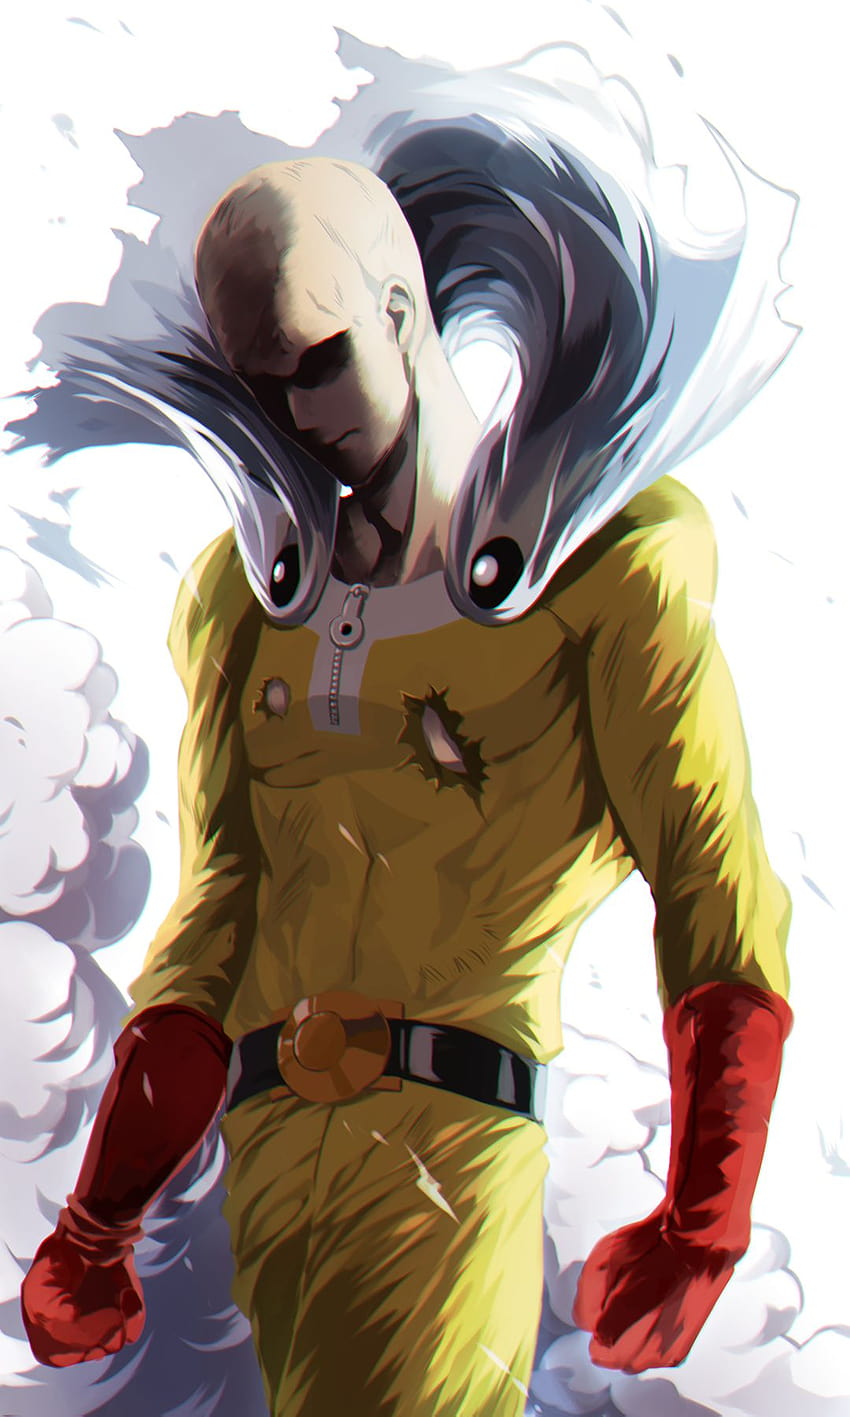 Saitama In One Punch Man Samsung Galaxy Note 9 8 S... iPhone Wallpapers  Free Download